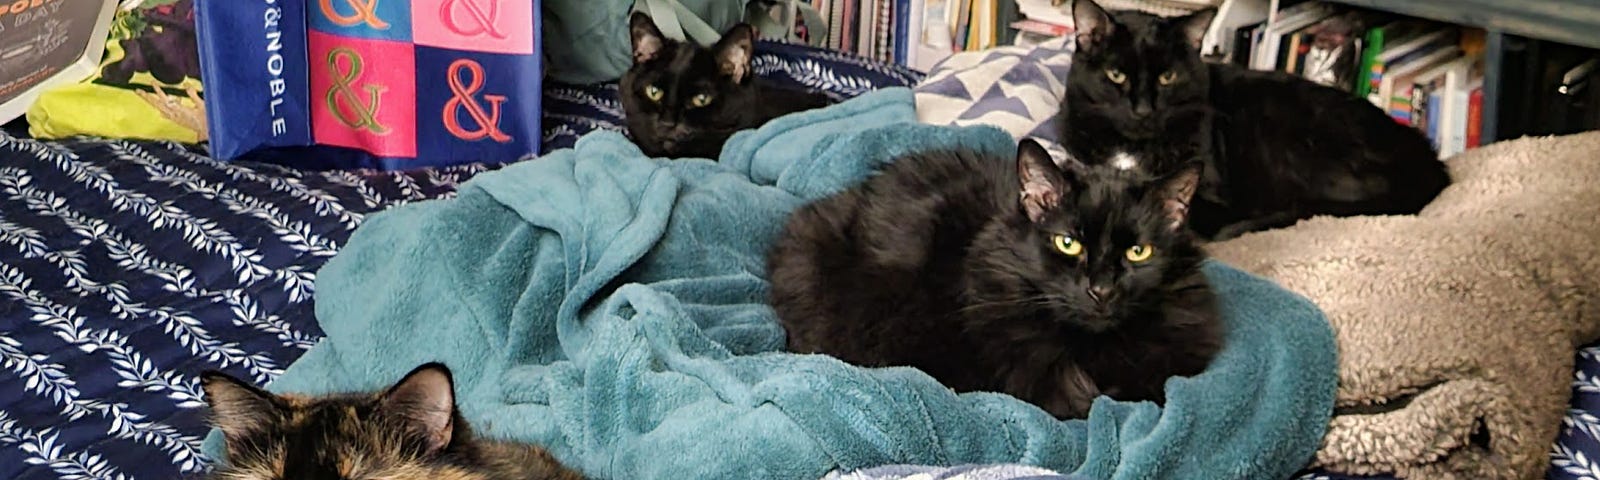 four cats curled up on separate blankets on a colorful, though unkempt, bed